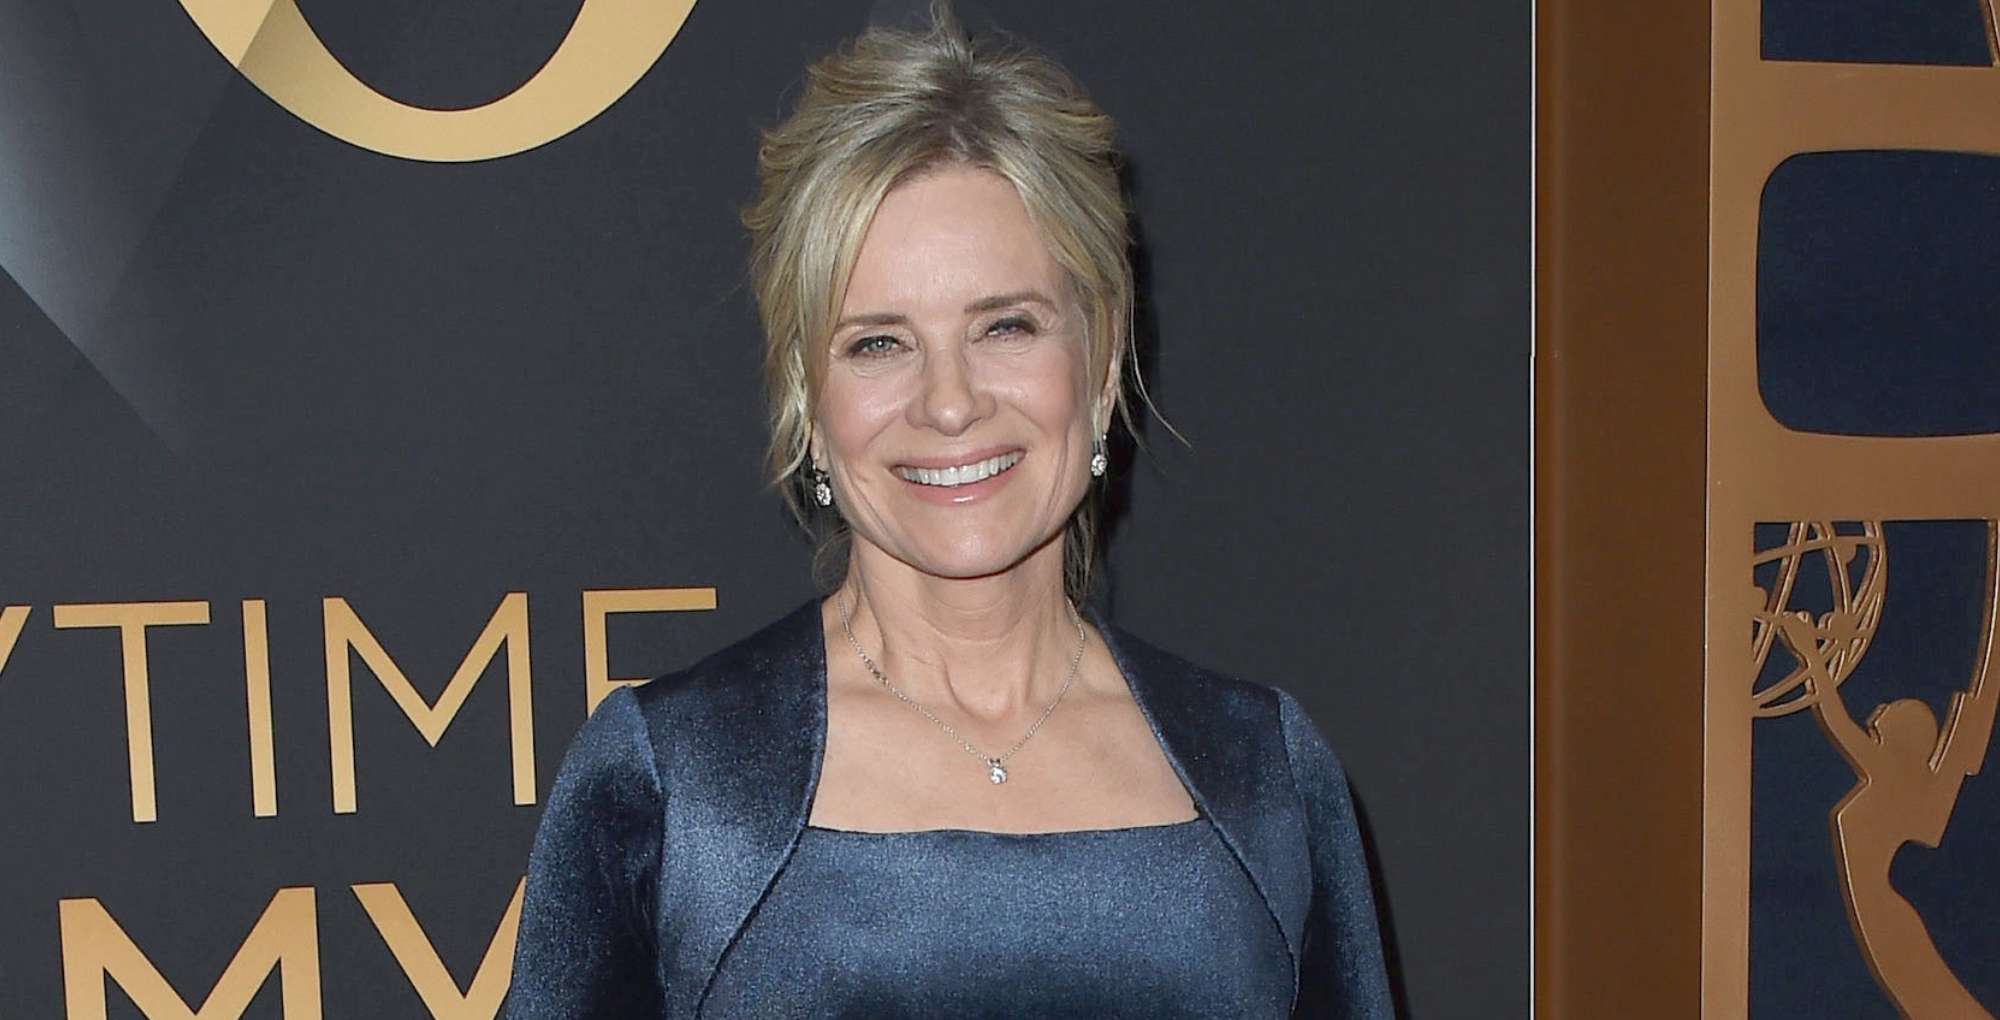 Days of our Lives star Mary Beth Evans celebrates her birthday.